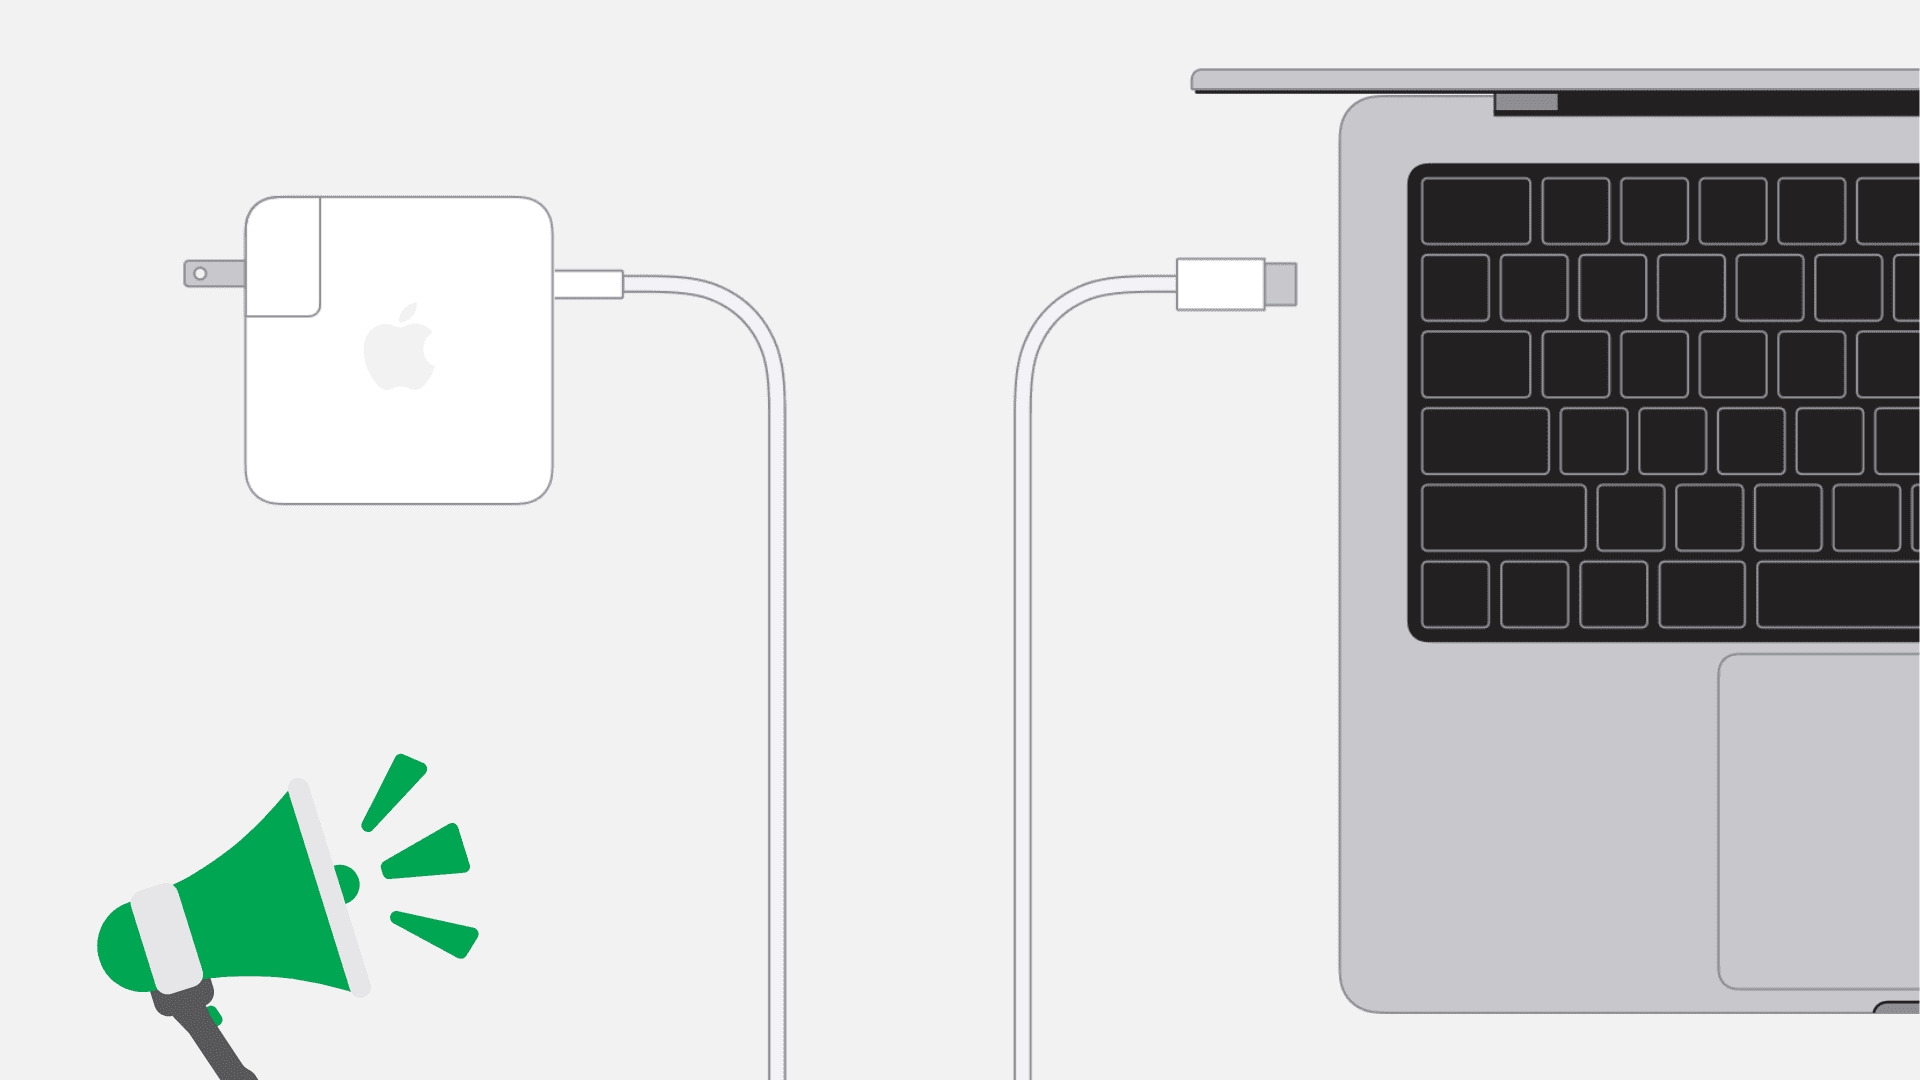 Illustration for battery charging chime on MacBook